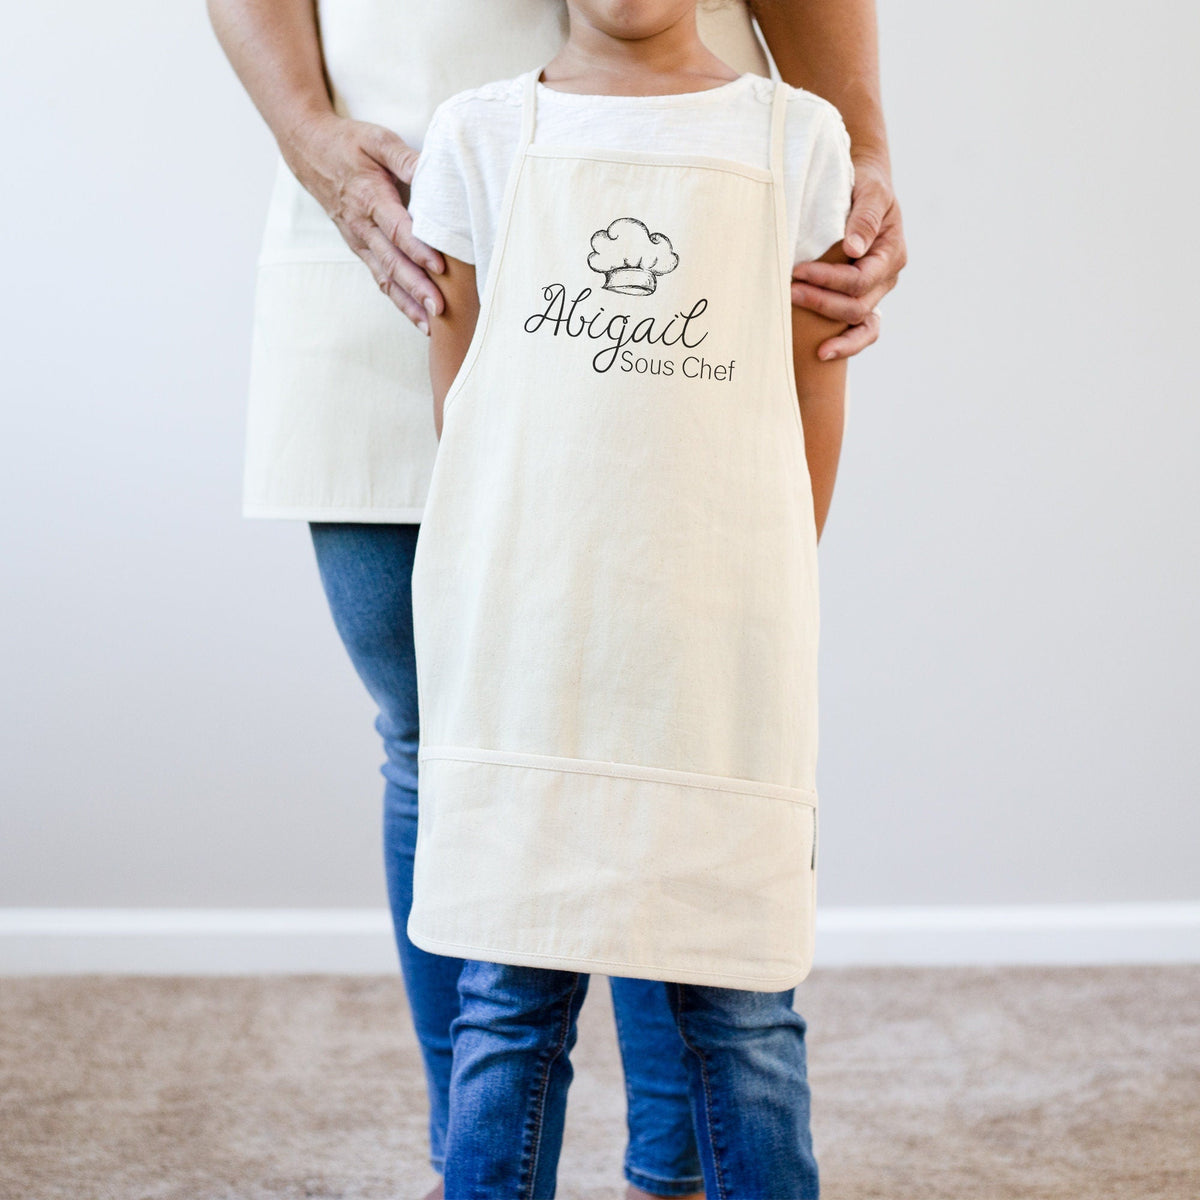 http://sweethooligans.design/cdn/shop/products/mommy-and-me-aprons-head-chef-sous-chef-apron-set-mothers-day-mommy-me-apron-gift-mommy-me-kitchen-apron-personalized-name-apron-set-266970_1200x1200.jpg?v=1668884383